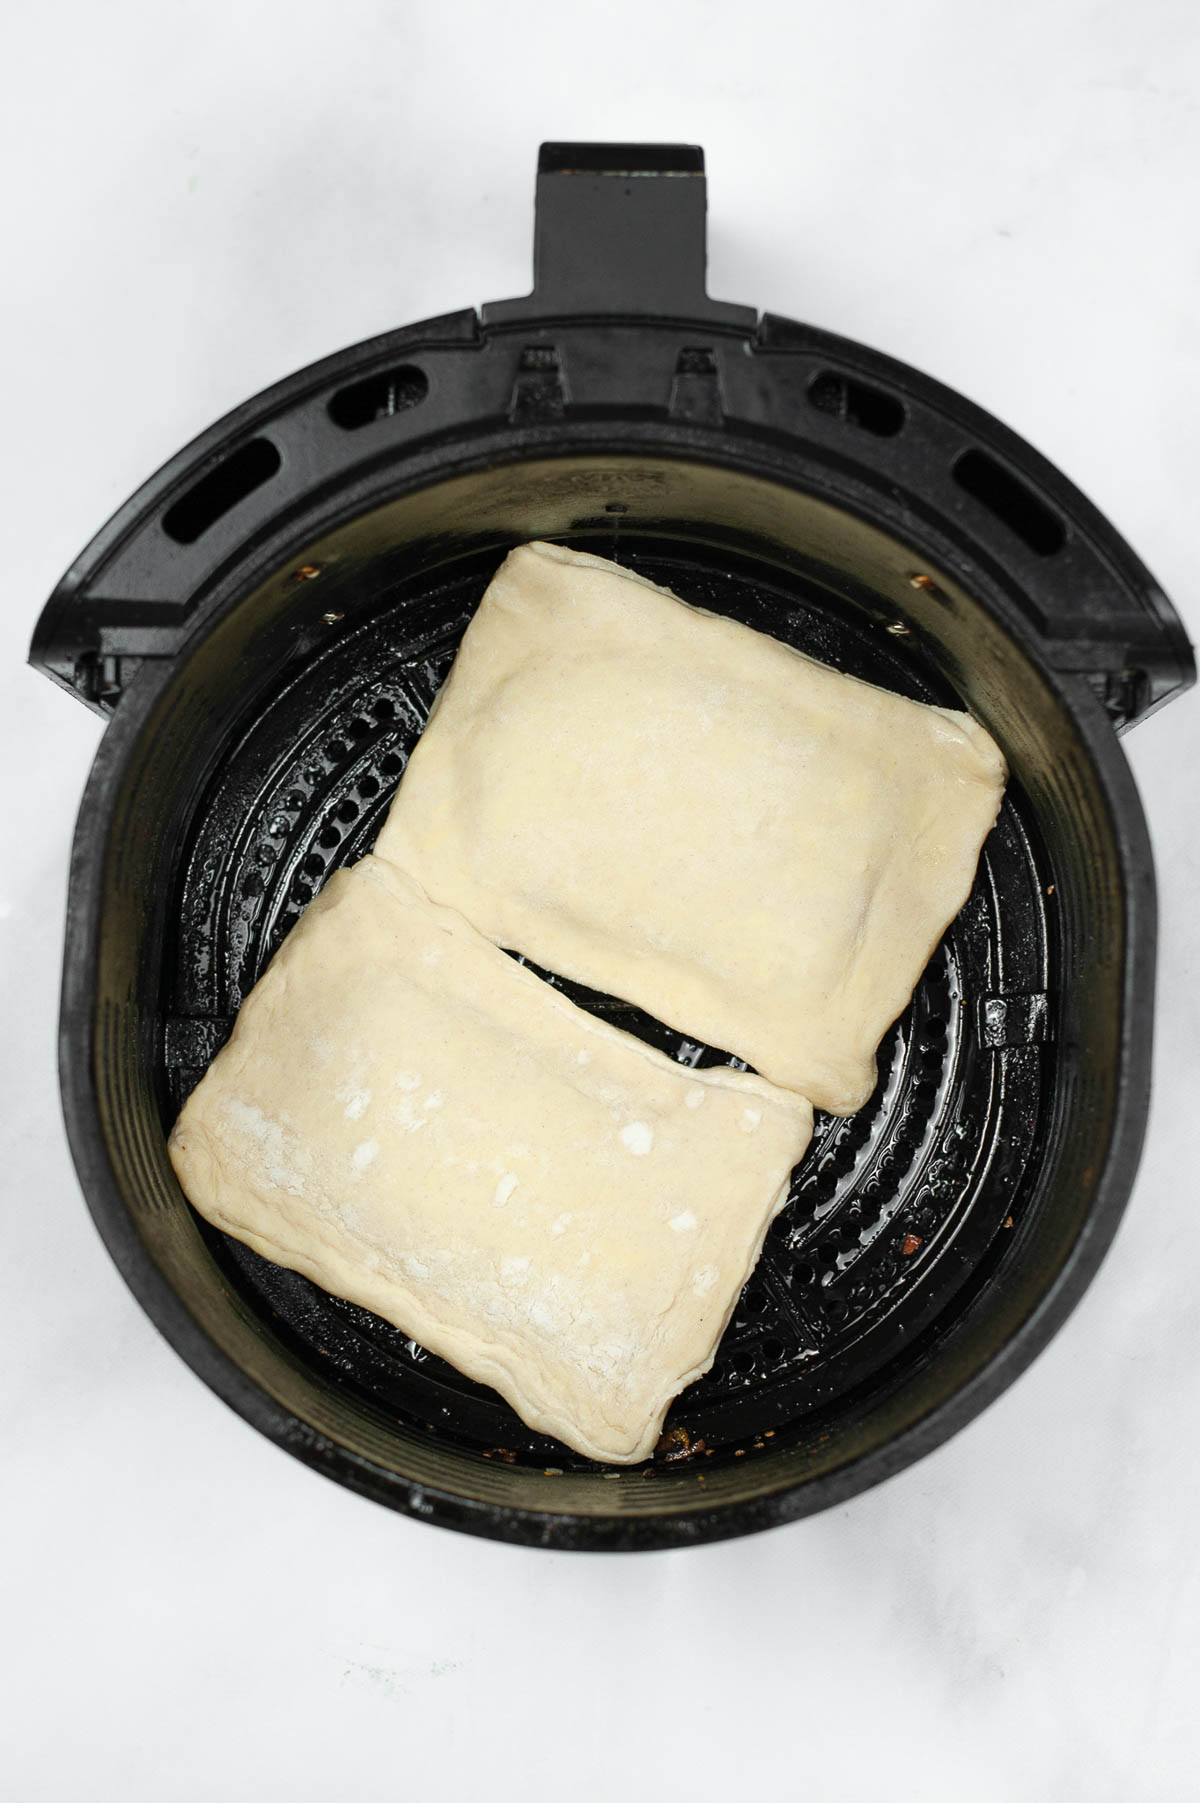 2 puff pastry toaster strudels in an air fryer